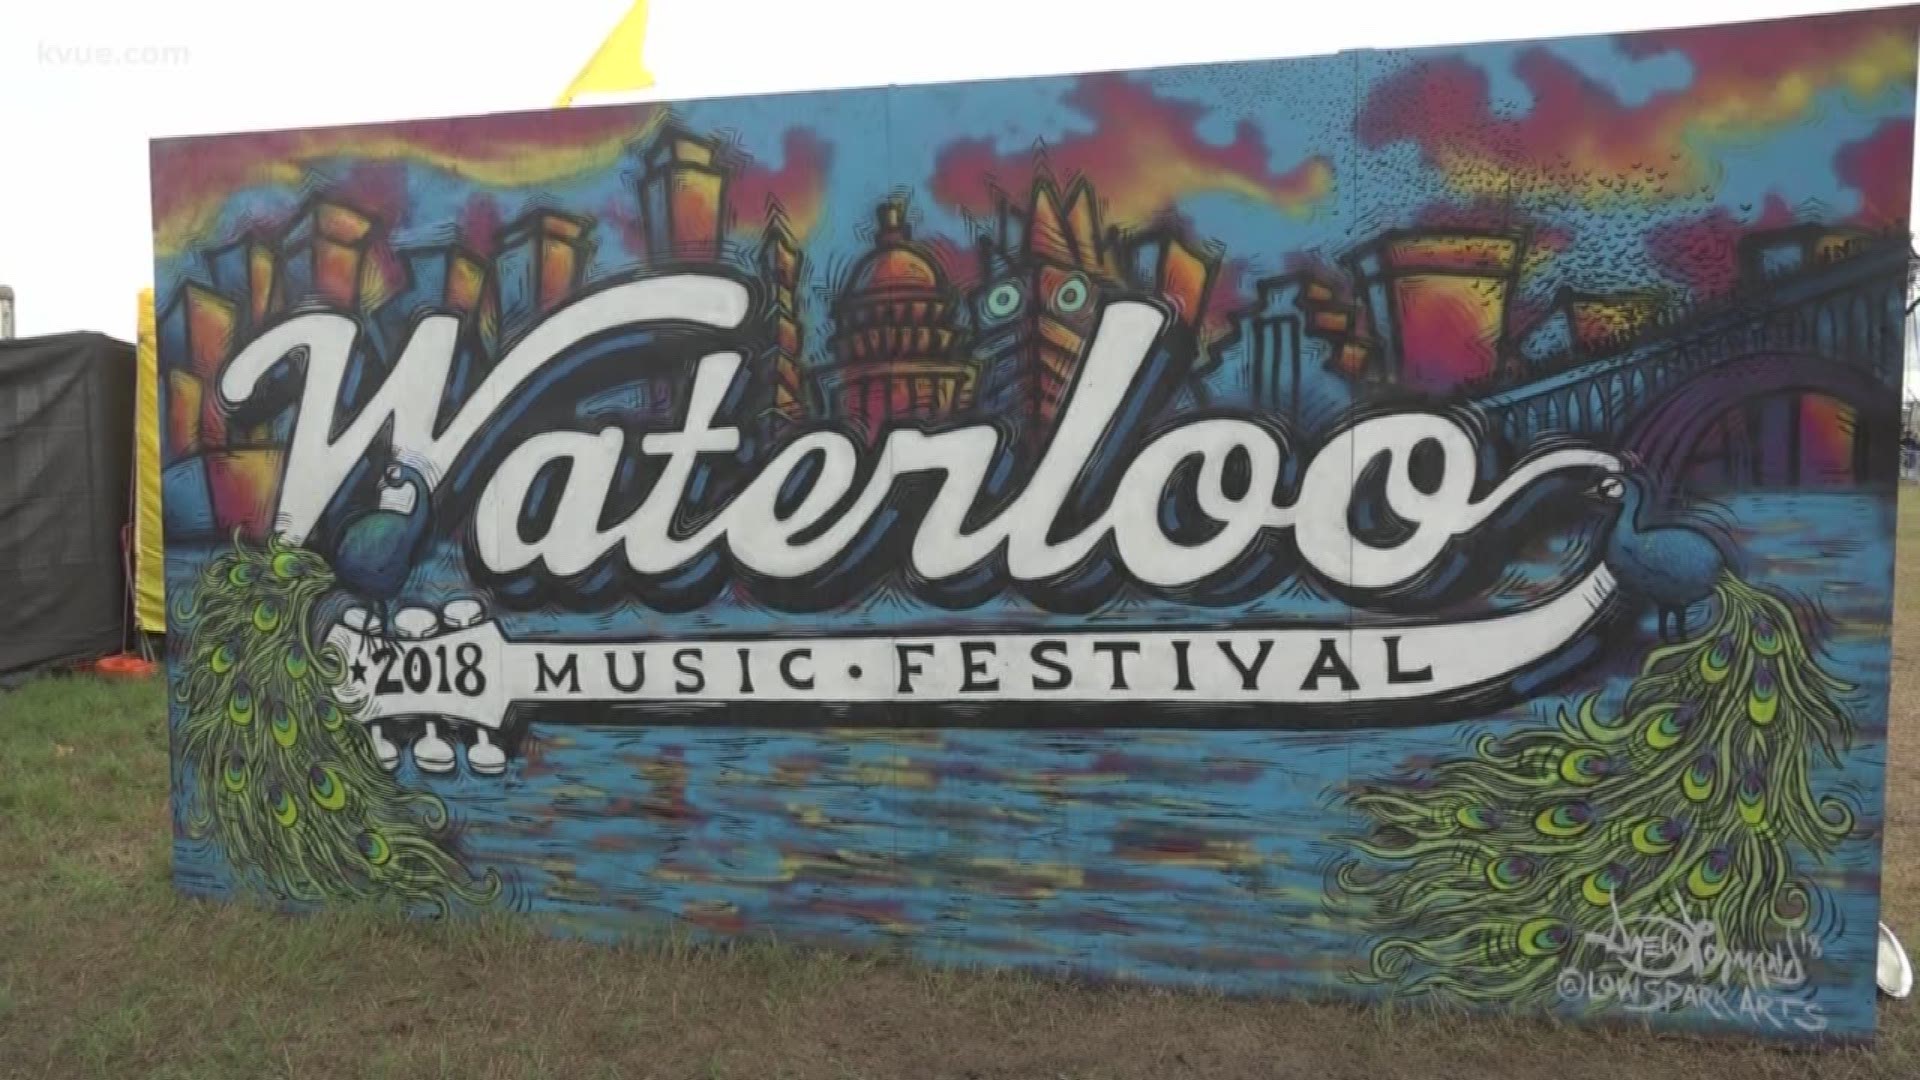 It may have been a wet weekend in Austin, but that didn't stop festival goers from enjoying the first ever Waterloo Music Festival in Austin.